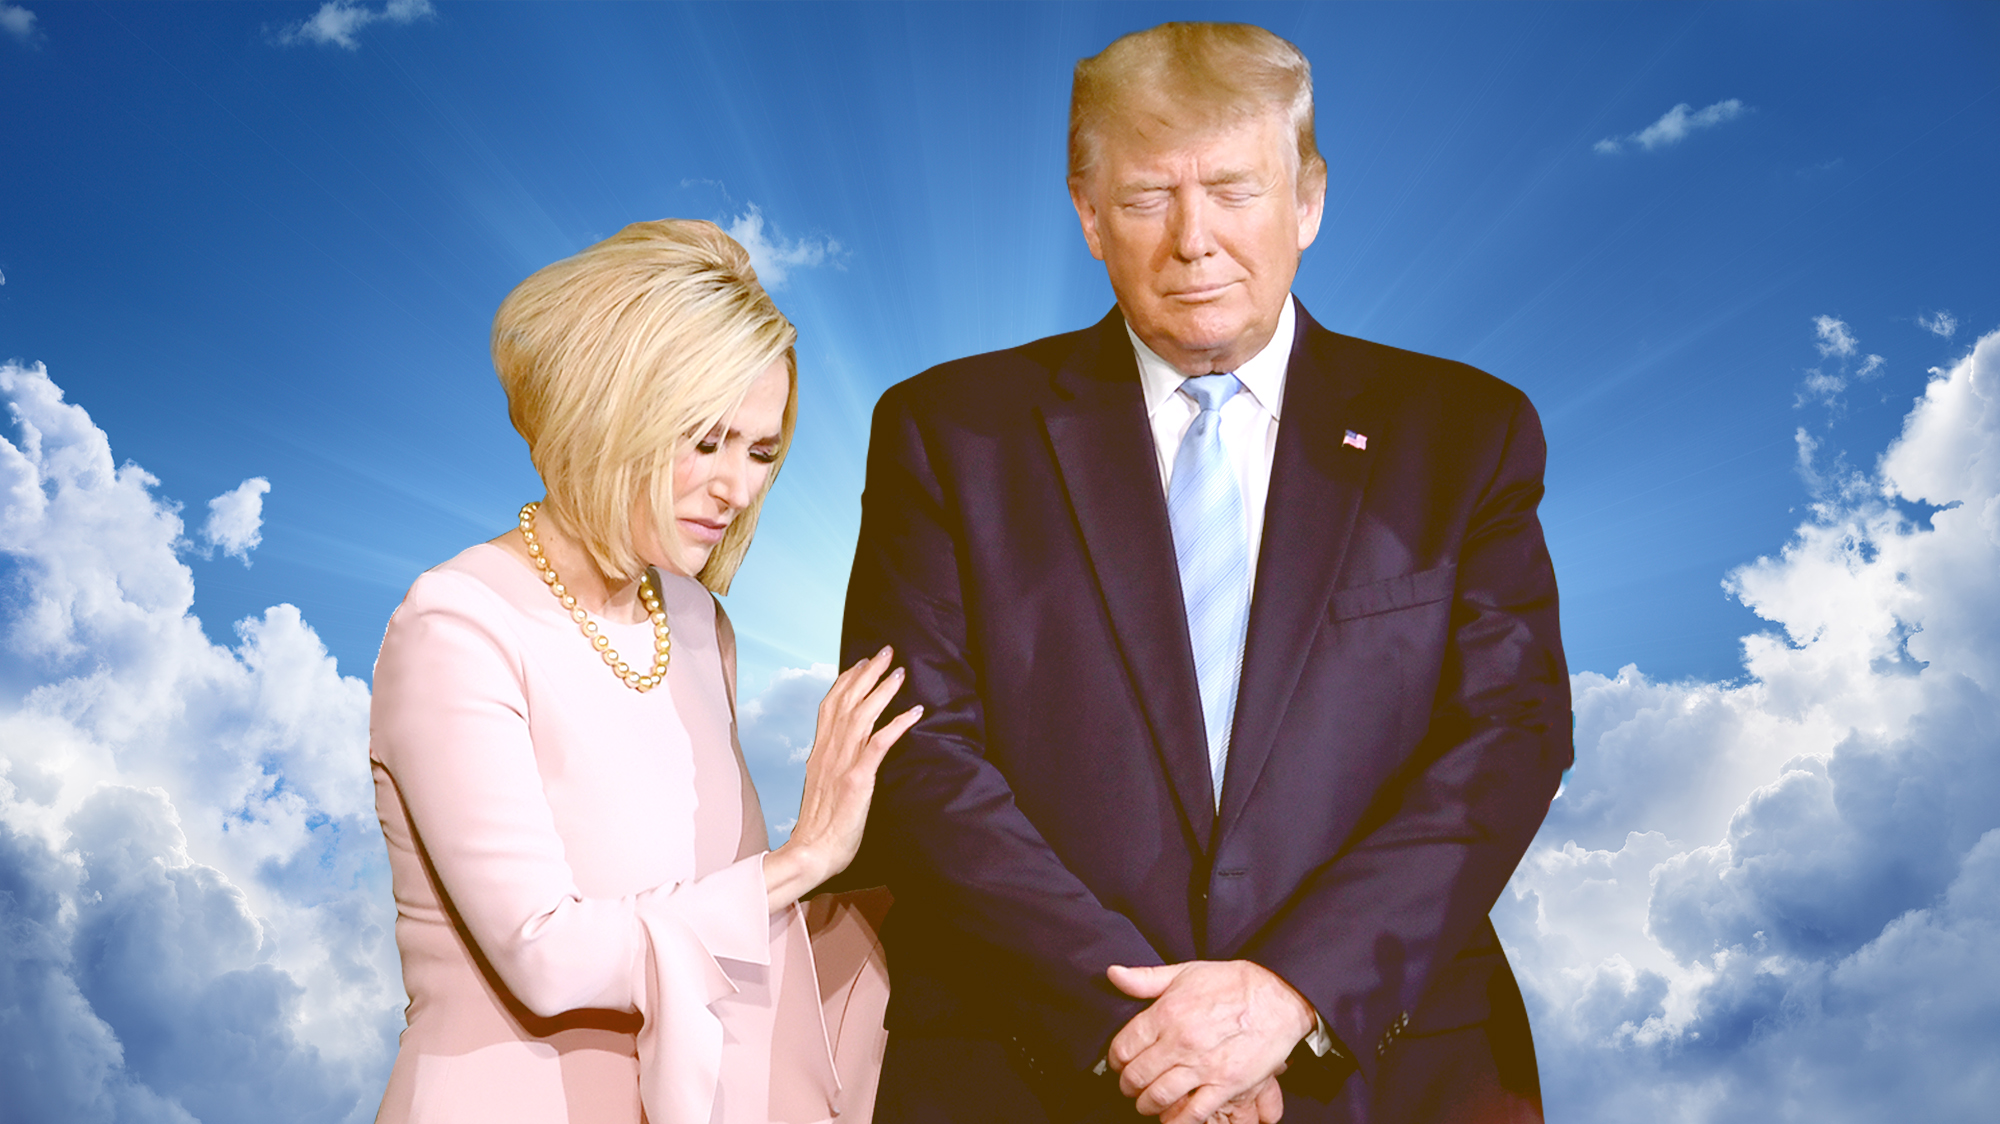 How Do You Get From the Trailer Park to a White House Job? Give Money to Trump's Spiritual Adviser. – Mother Jones